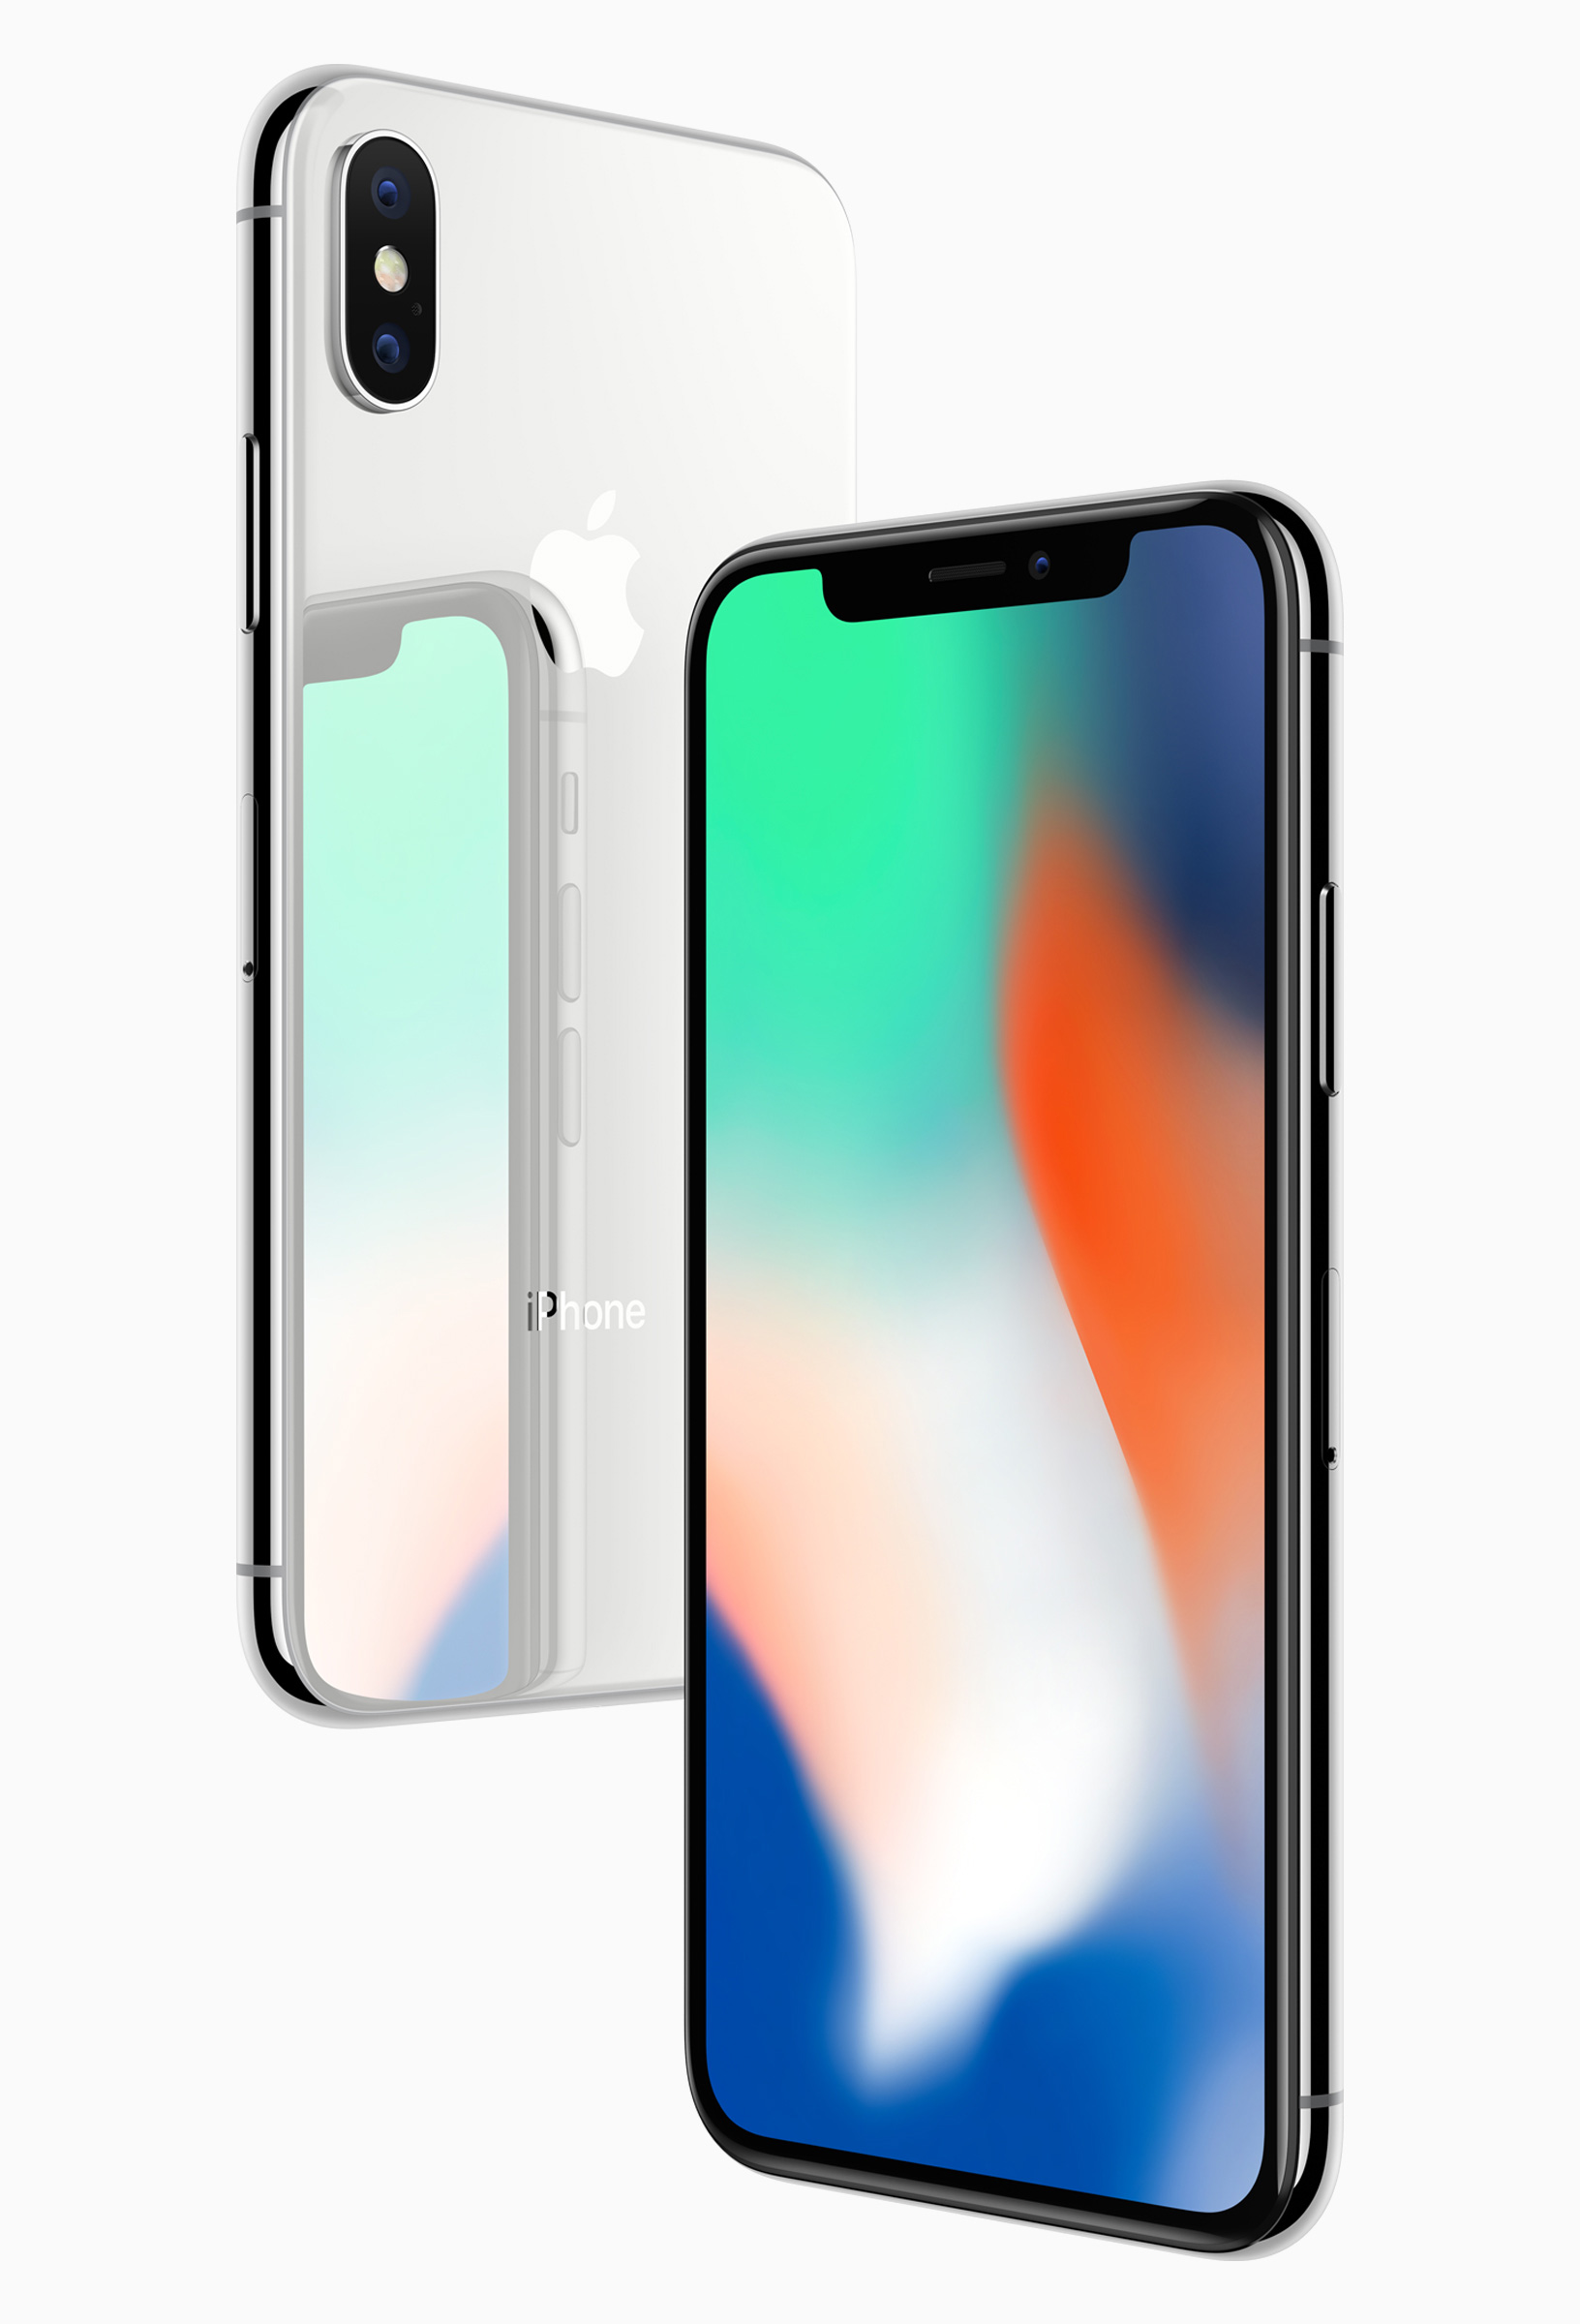 jammer kit autozone parts | iPhone X Features Face ID, Edge-to-Edge Screen